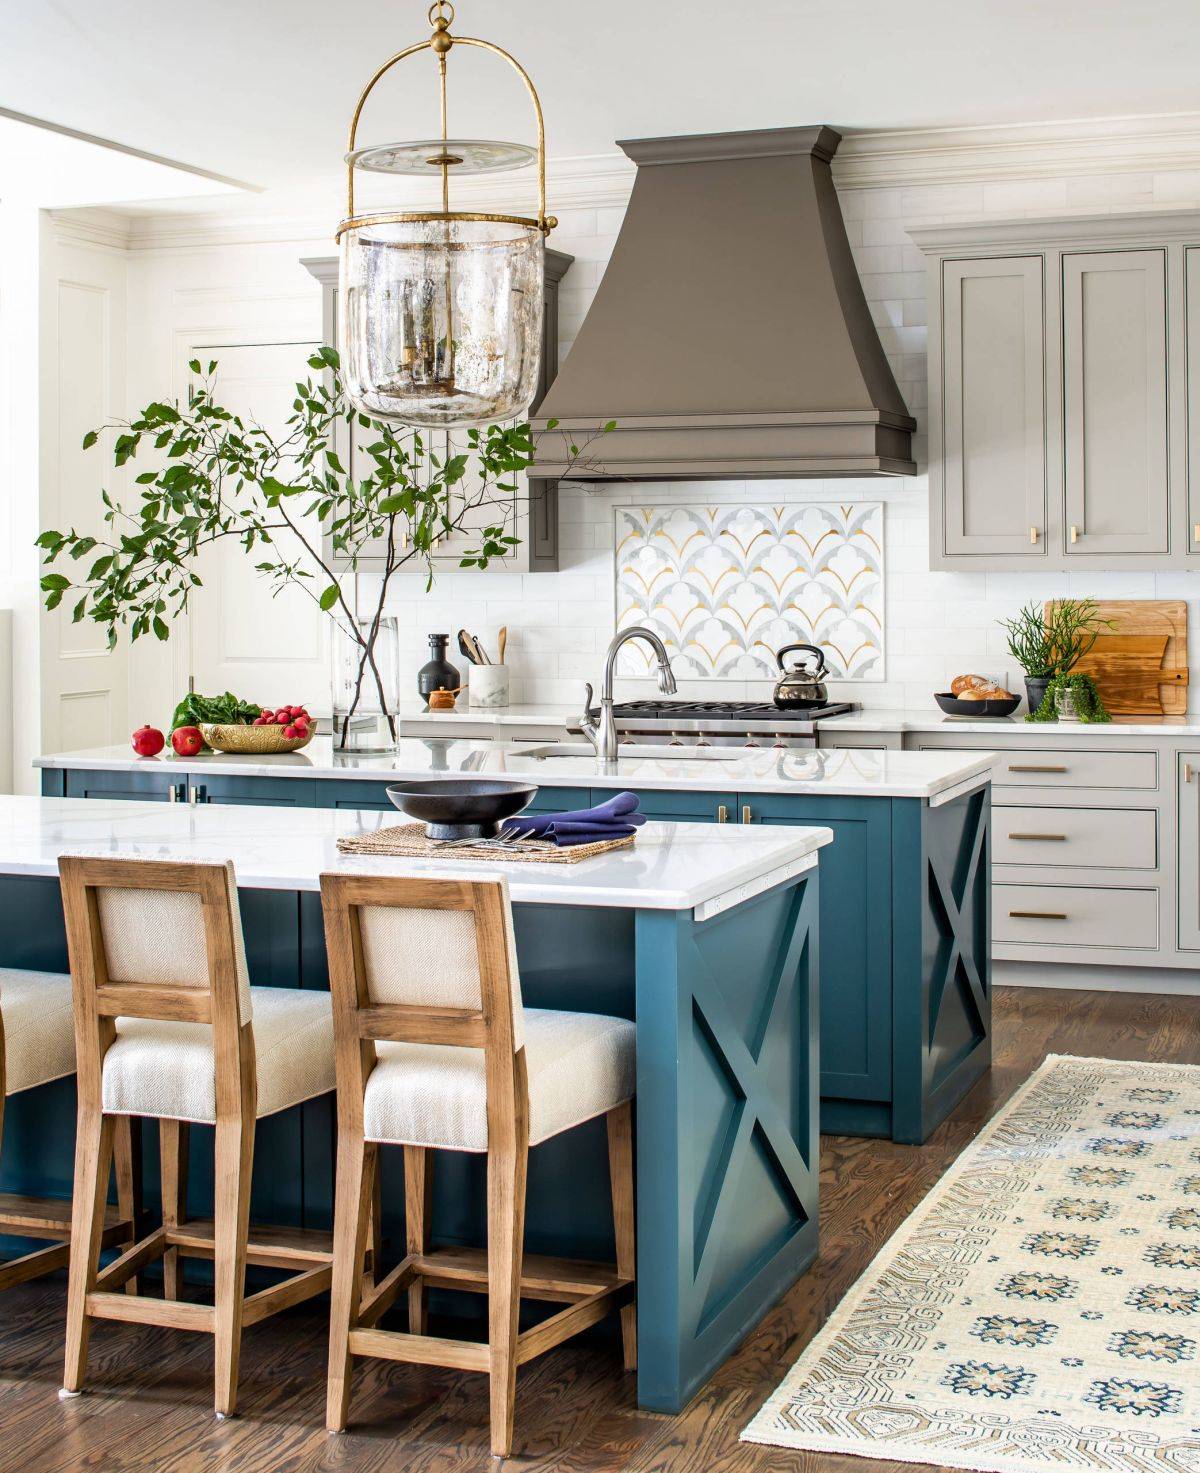 18 More Top Kitchen Decorating Trends to Embrace in the New Year